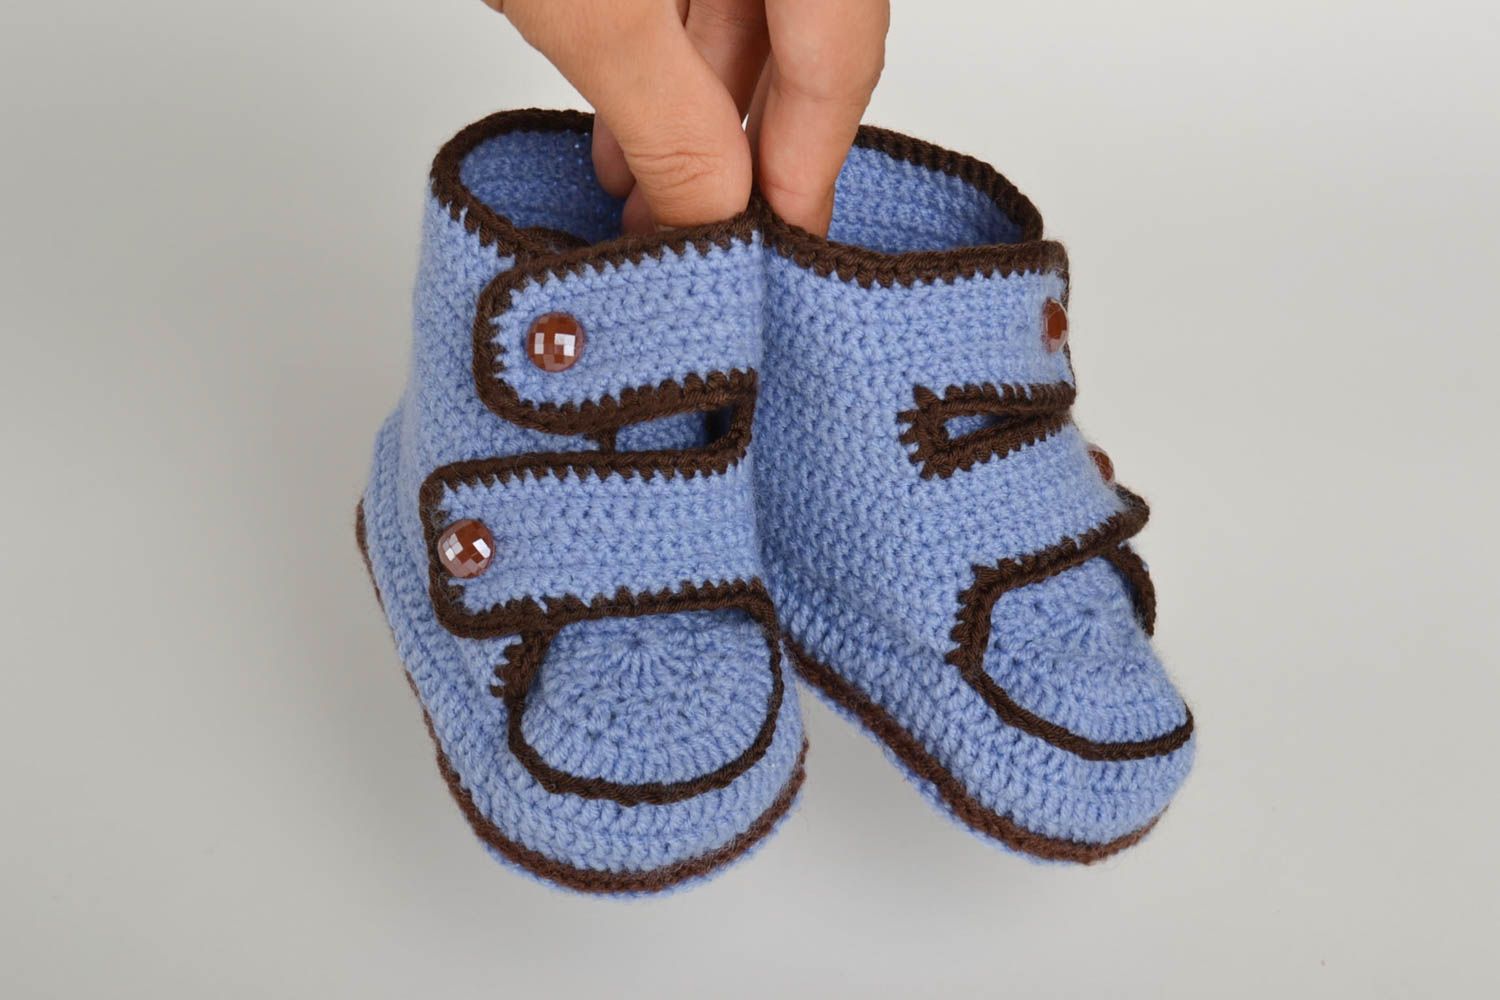 Handmade cute baby bootees blue crocheted baby bootees unusual warm kids shoes photo 5